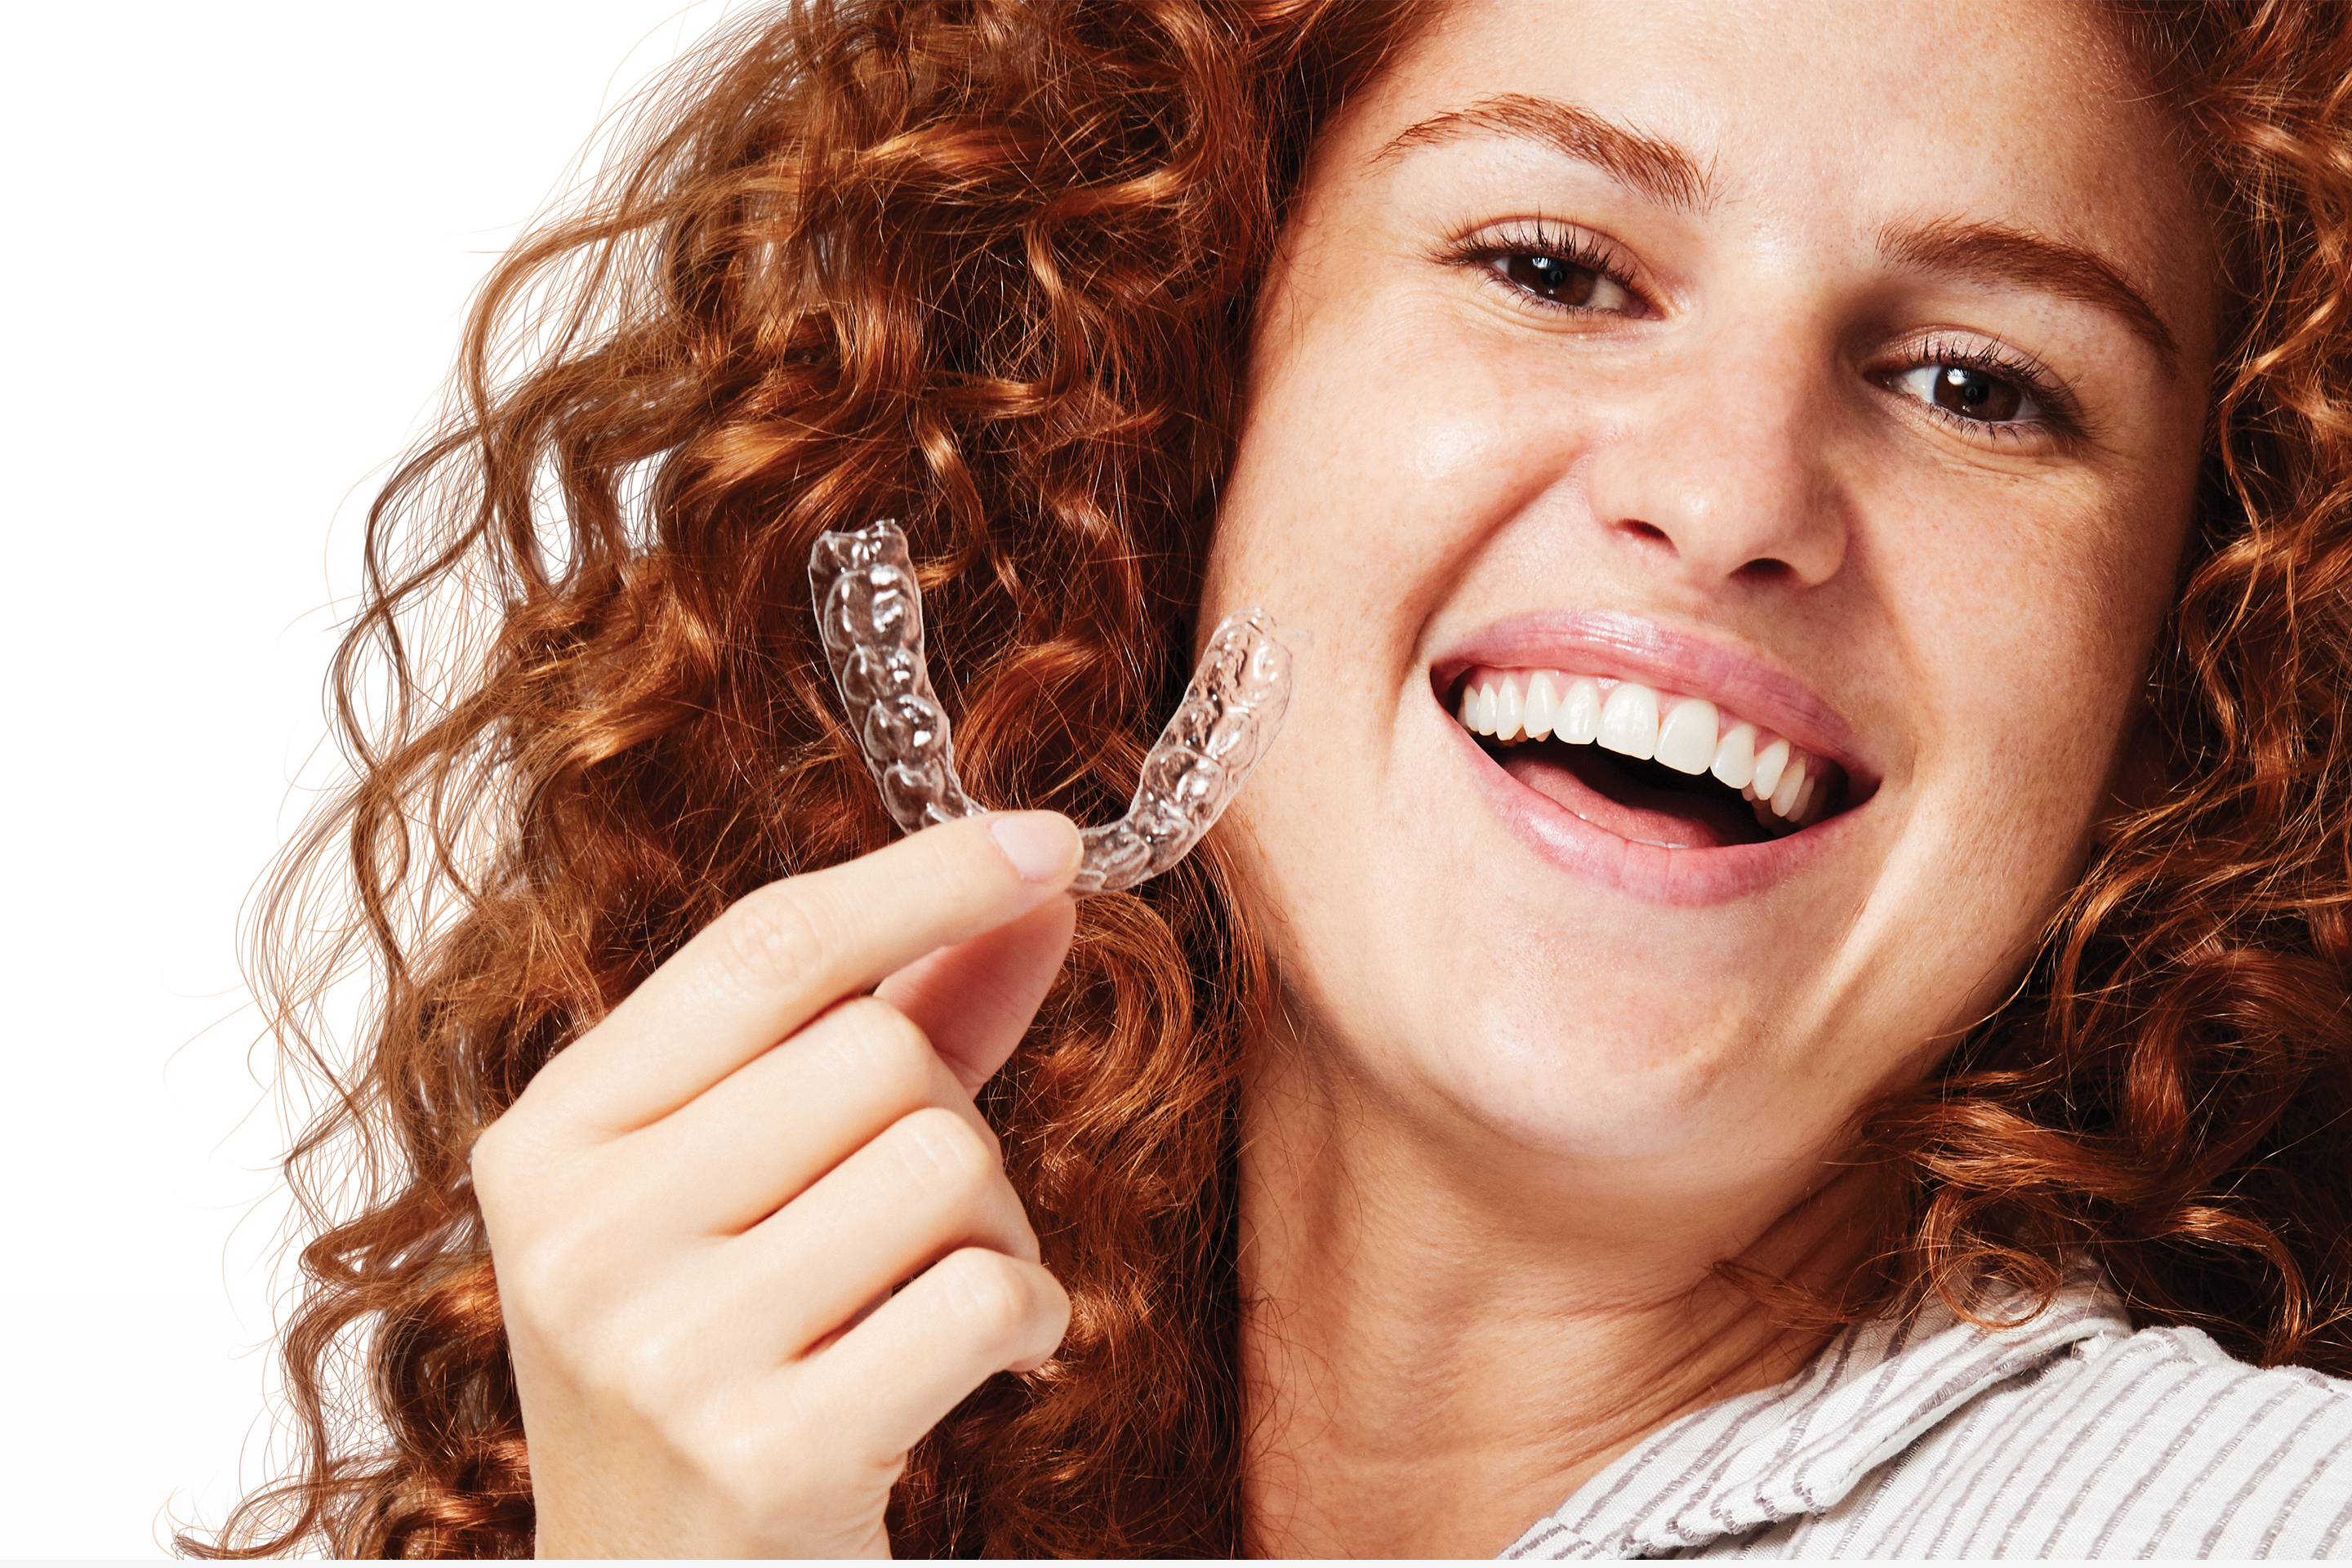 Close up headshot of a smiling woman with red curly hair holding SmileDirectClub aligner near her mouth